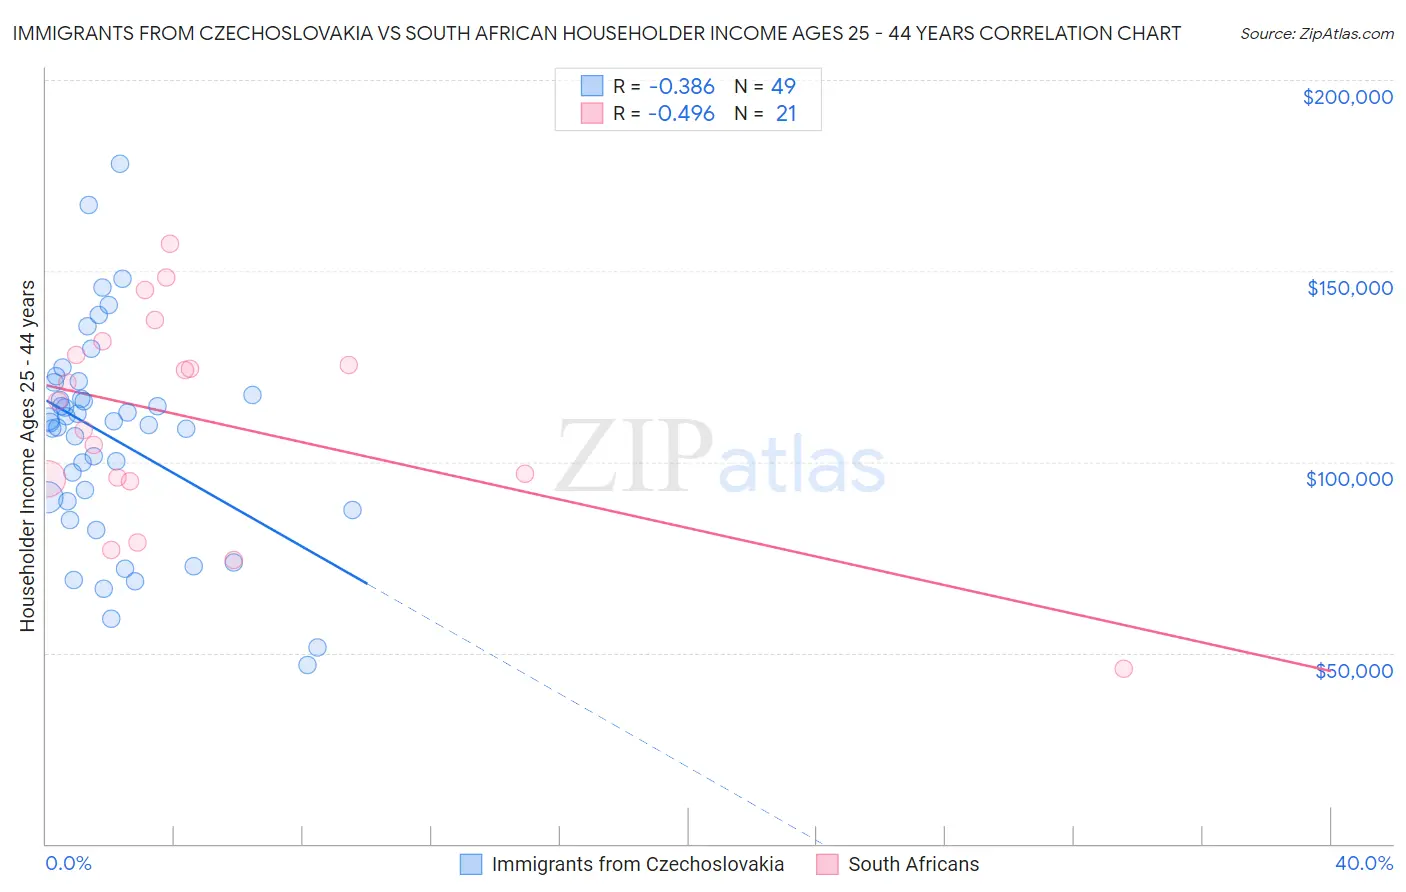 Immigrants from Czechoslovakia vs South African Householder Income Ages 25 - 44 years